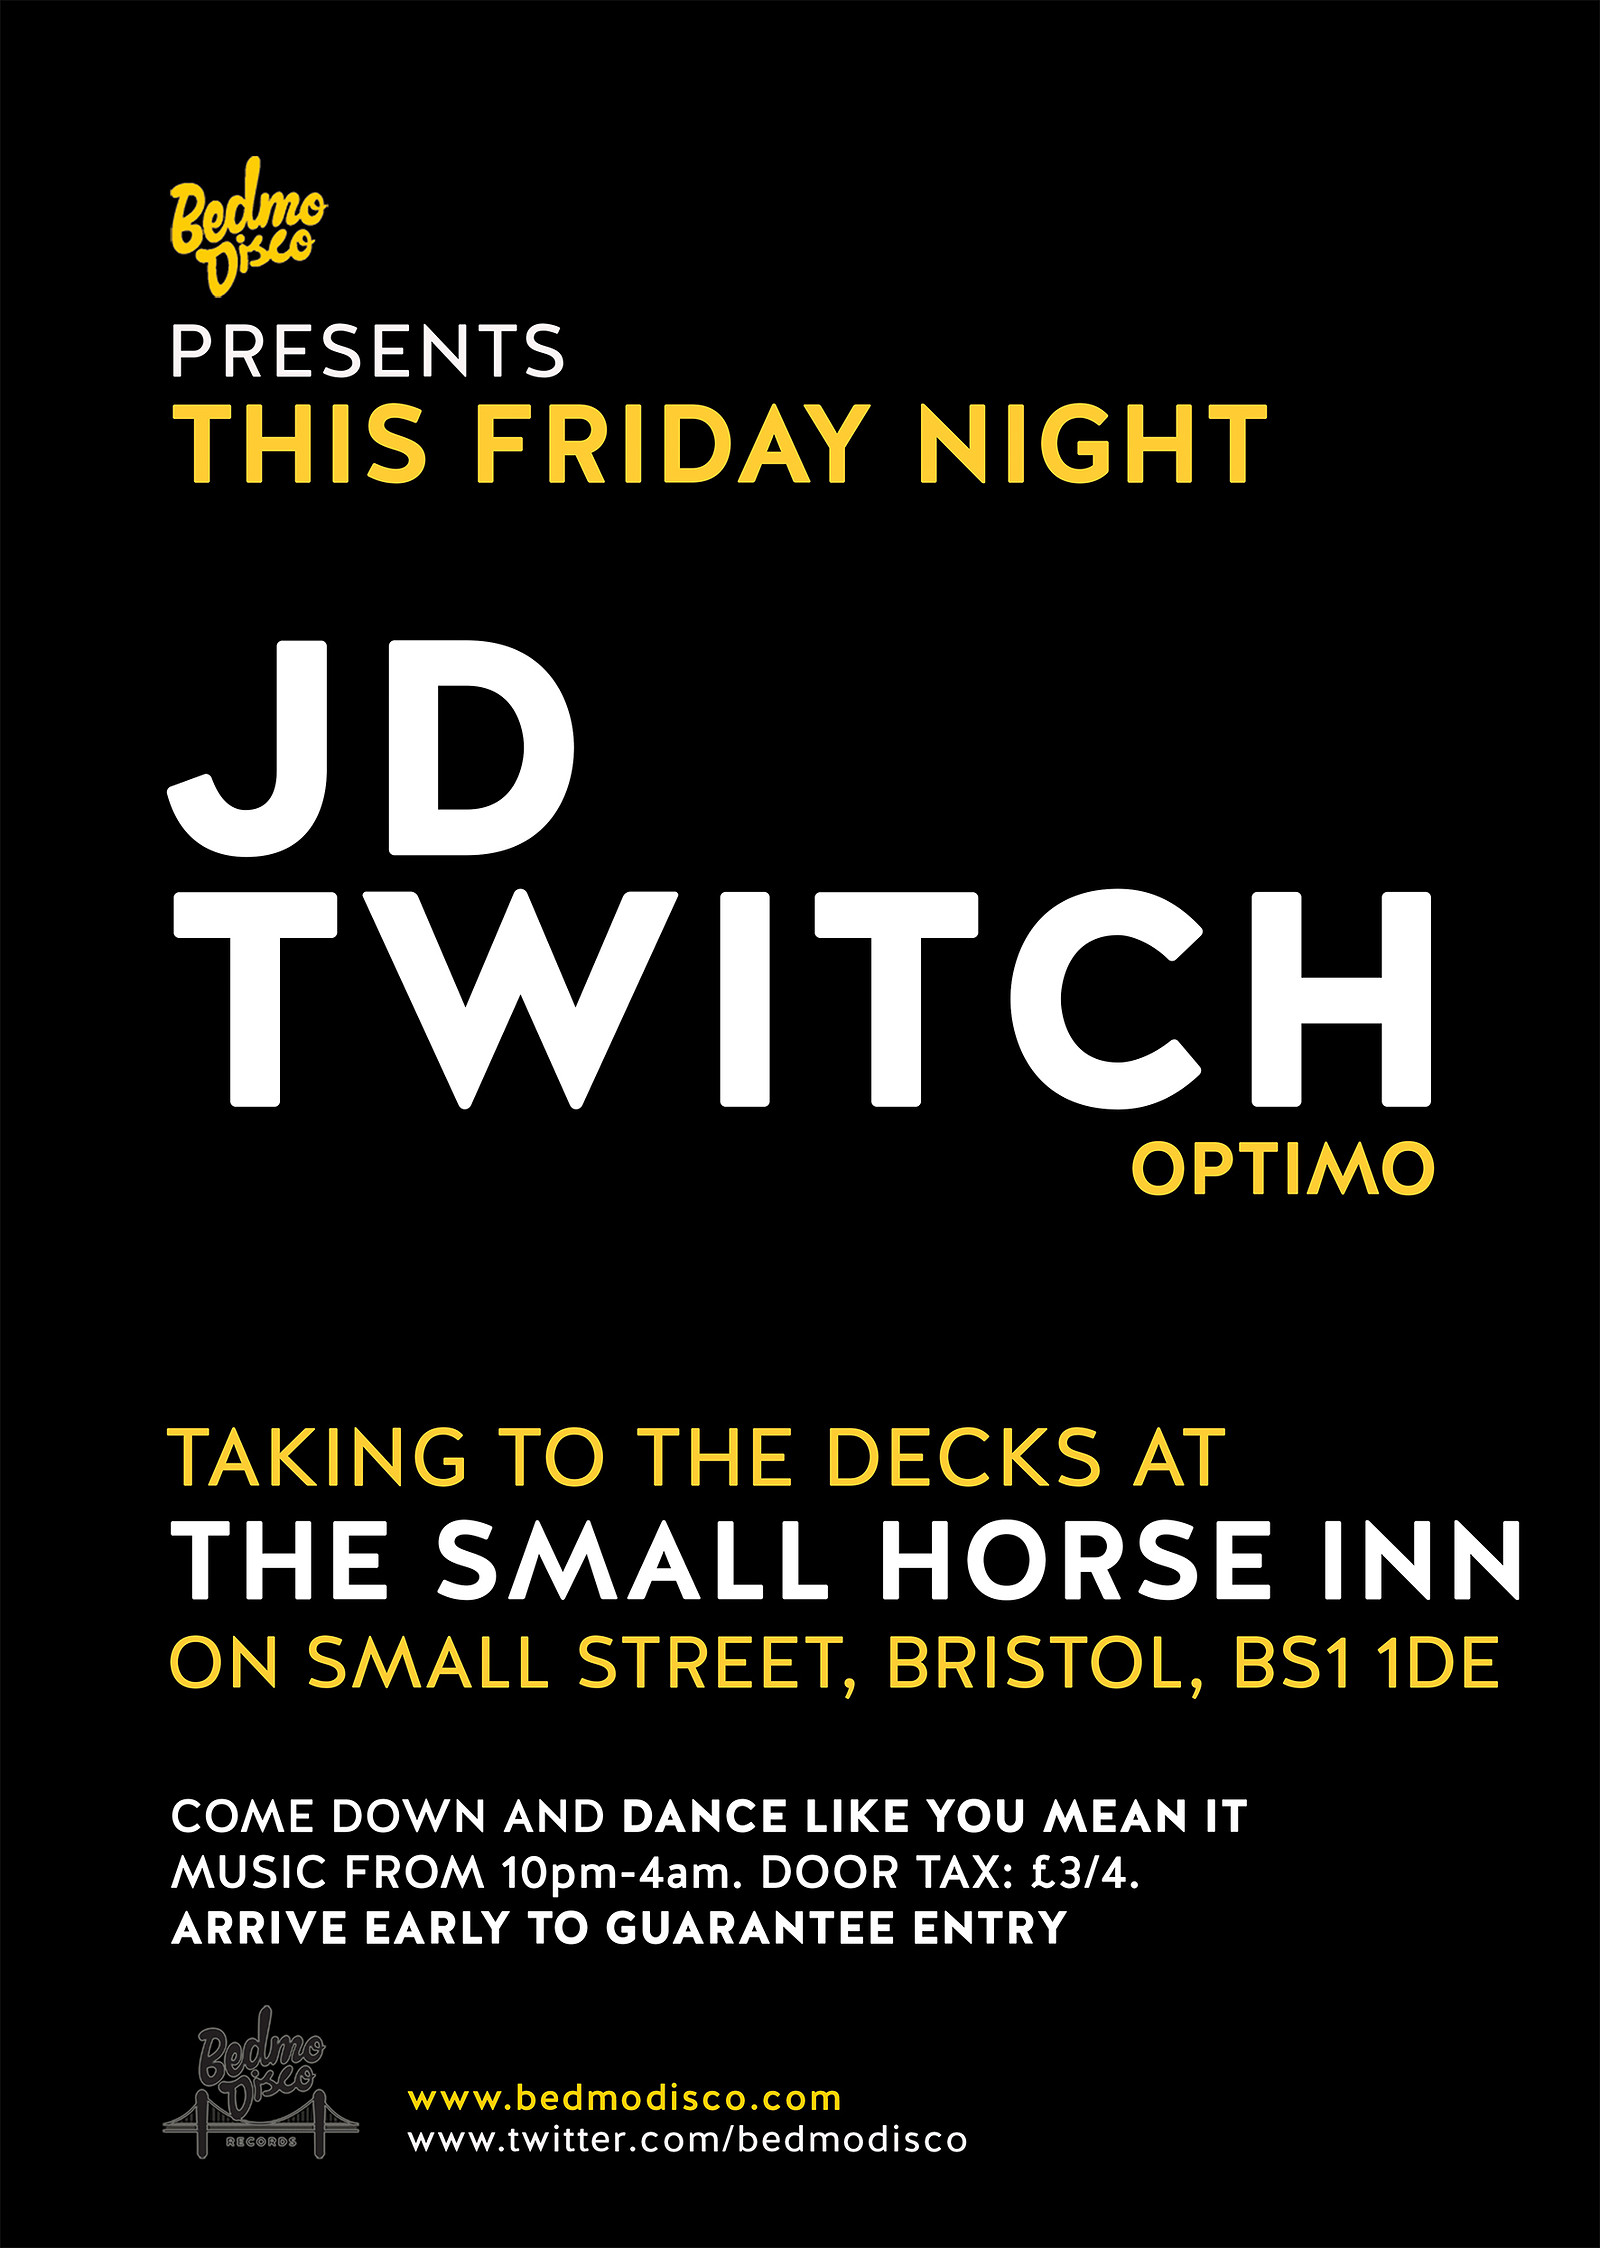 Bedmo Disco Presents Jd Twitch at The Small Horse Inn